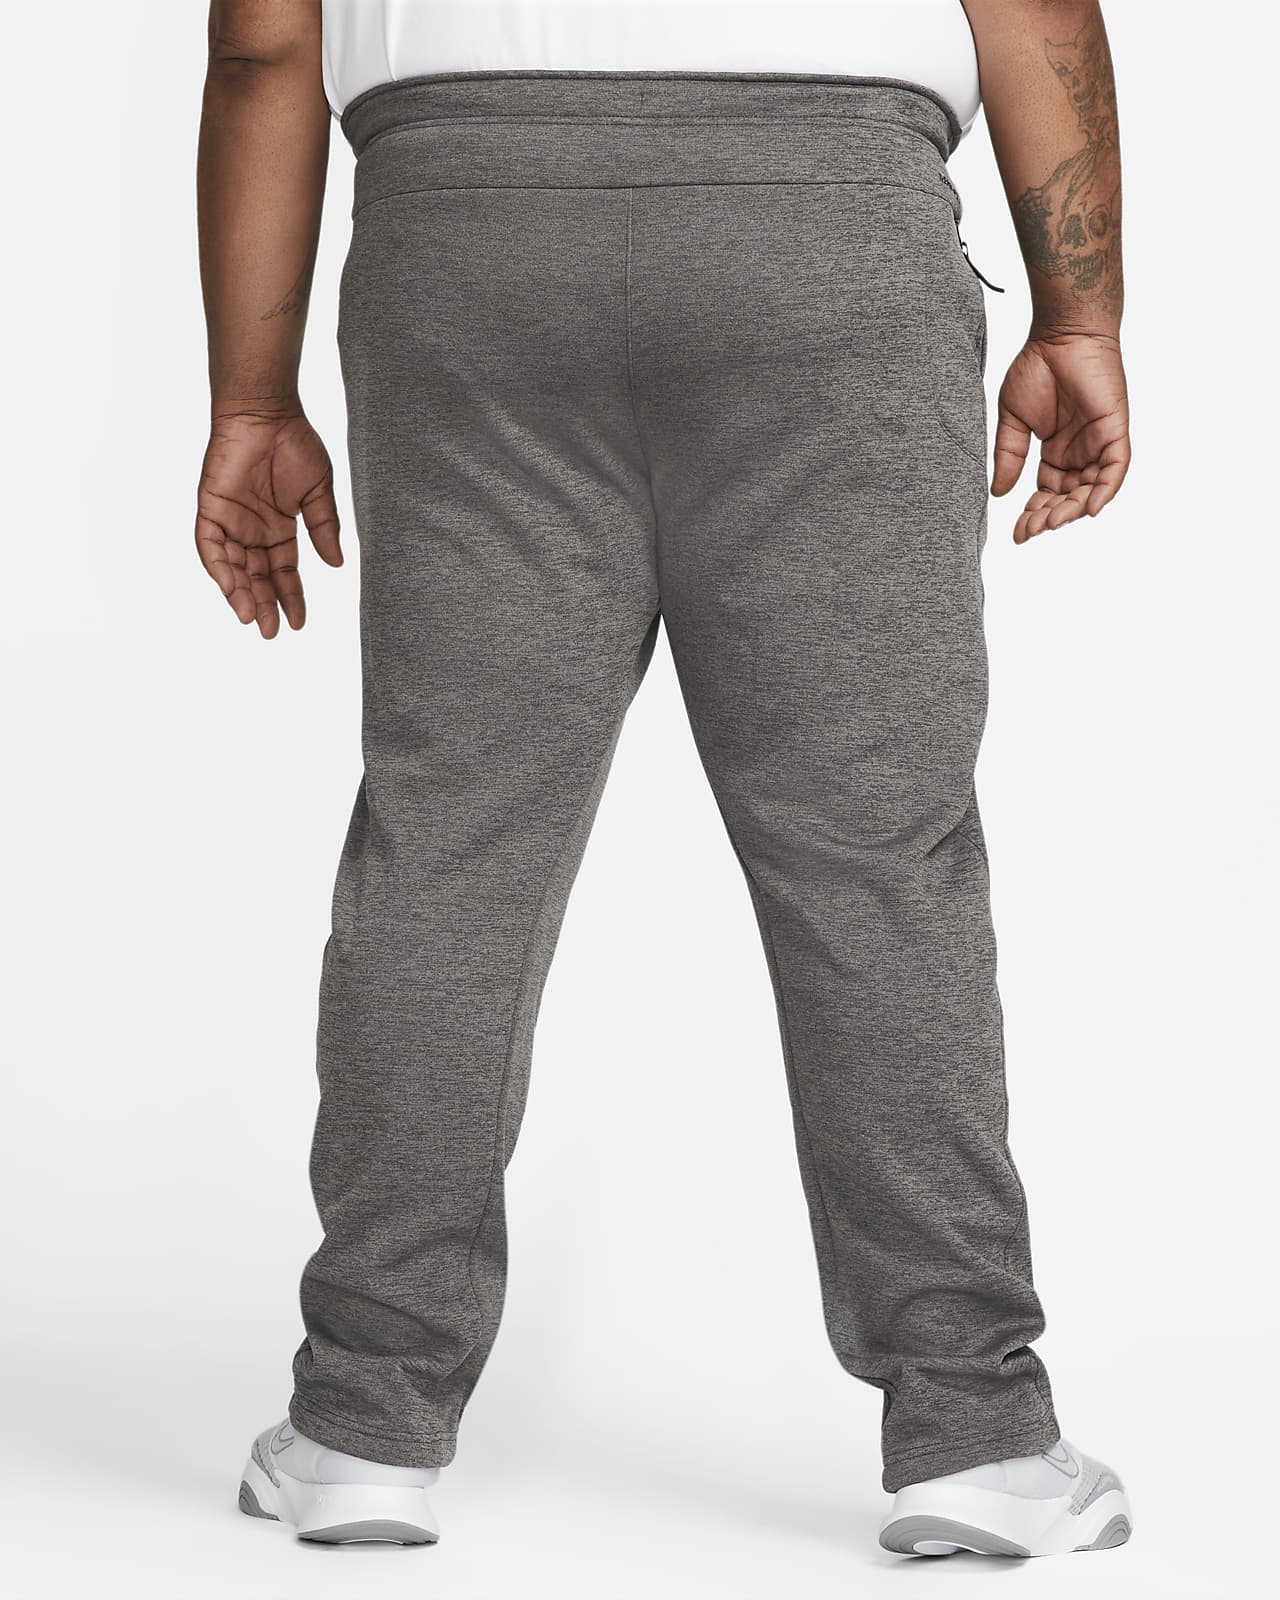 New Nike Women's Therma Training Pants CU5662-073 Particle Grey/Heather -  Large